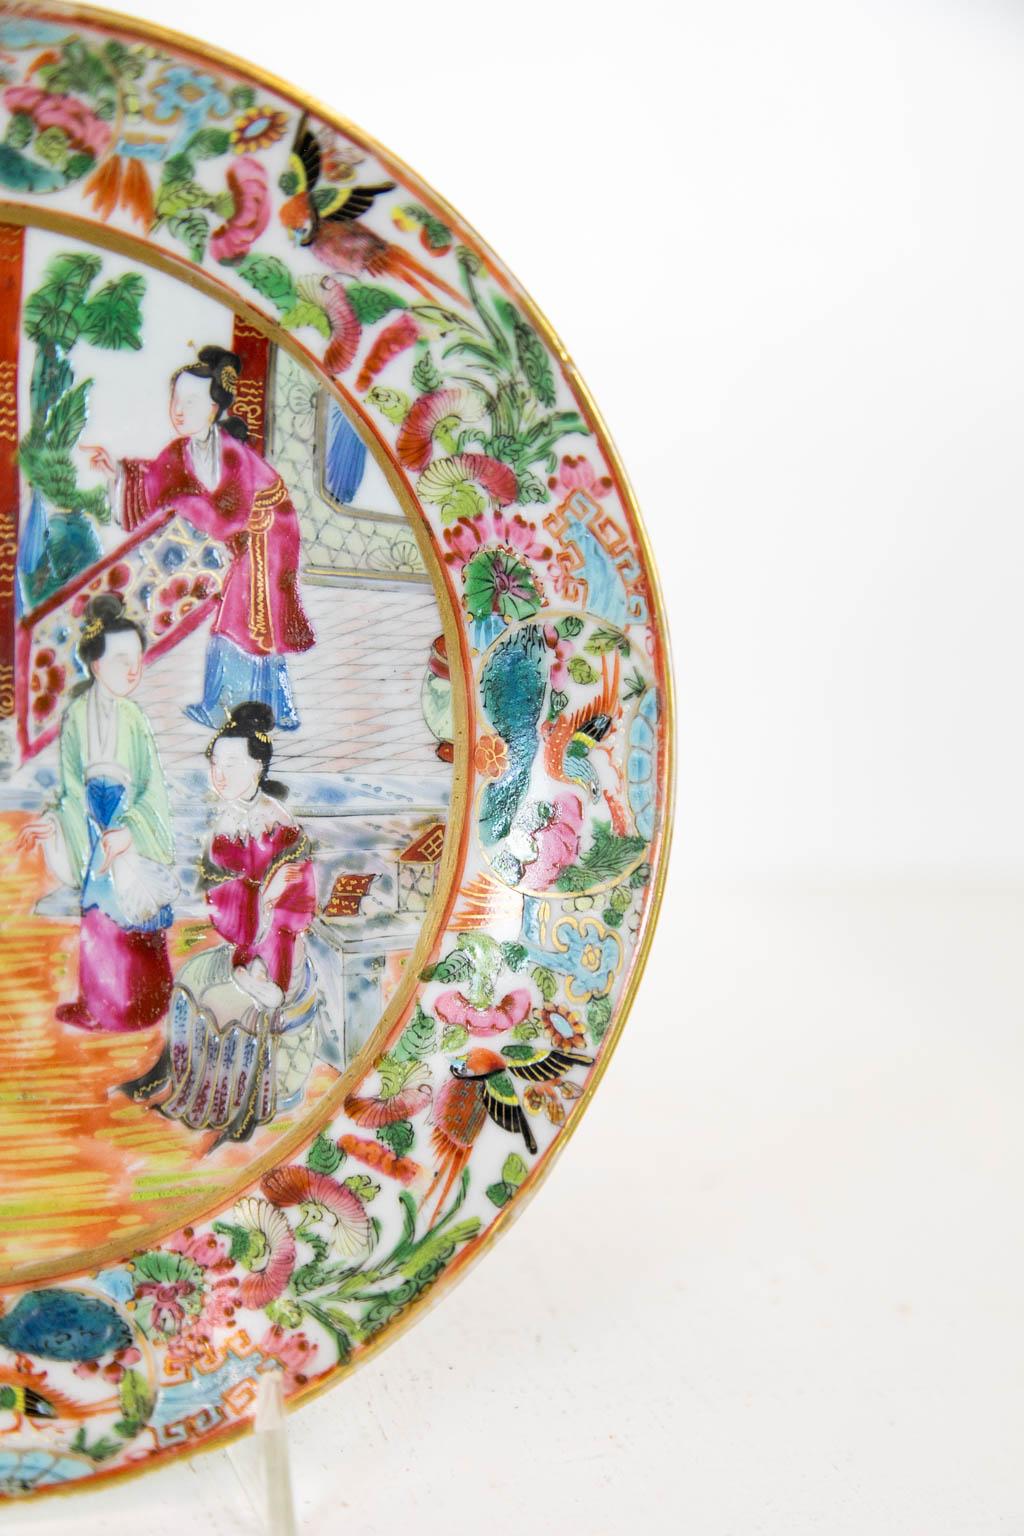 This plate has a center with Mandarin court scenes framed by a border of birds, butterflies, and leaf and floral decorations. It is in mint condition.